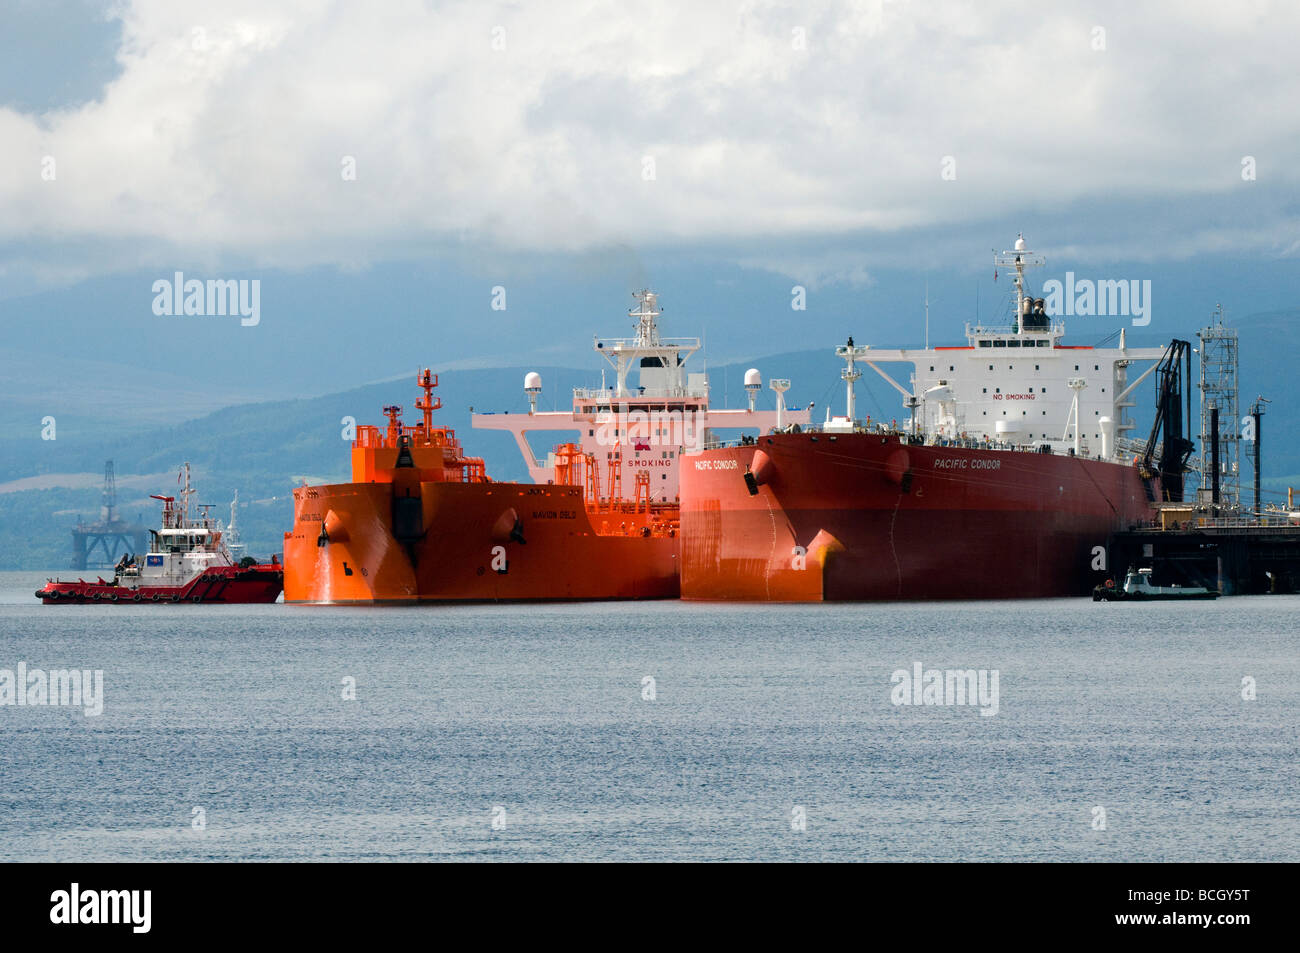 Oil Tankers Navion Oslo and Pacific Condor in the Cromarty Firth Stock Photo